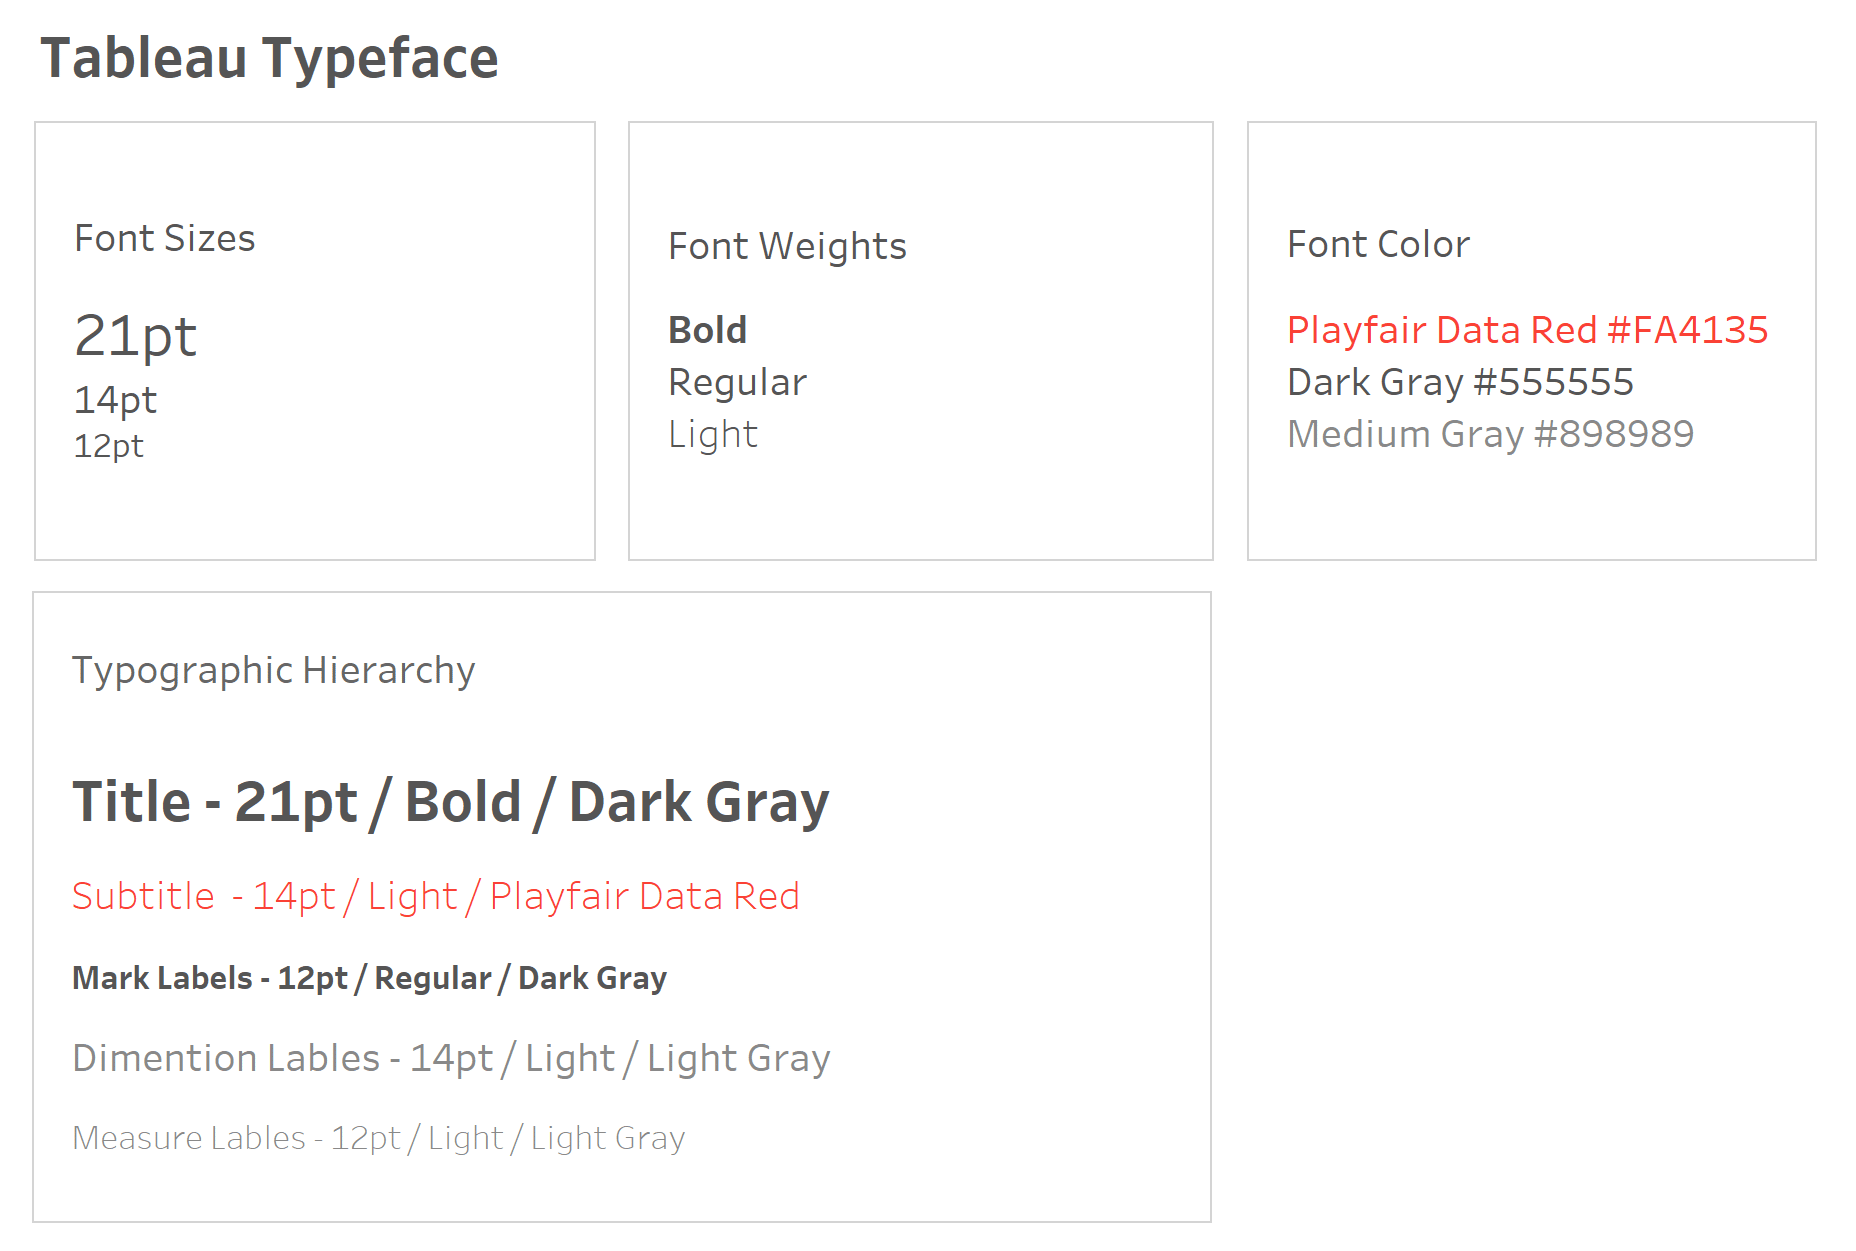 A simple typographic hierarchy in Tableau